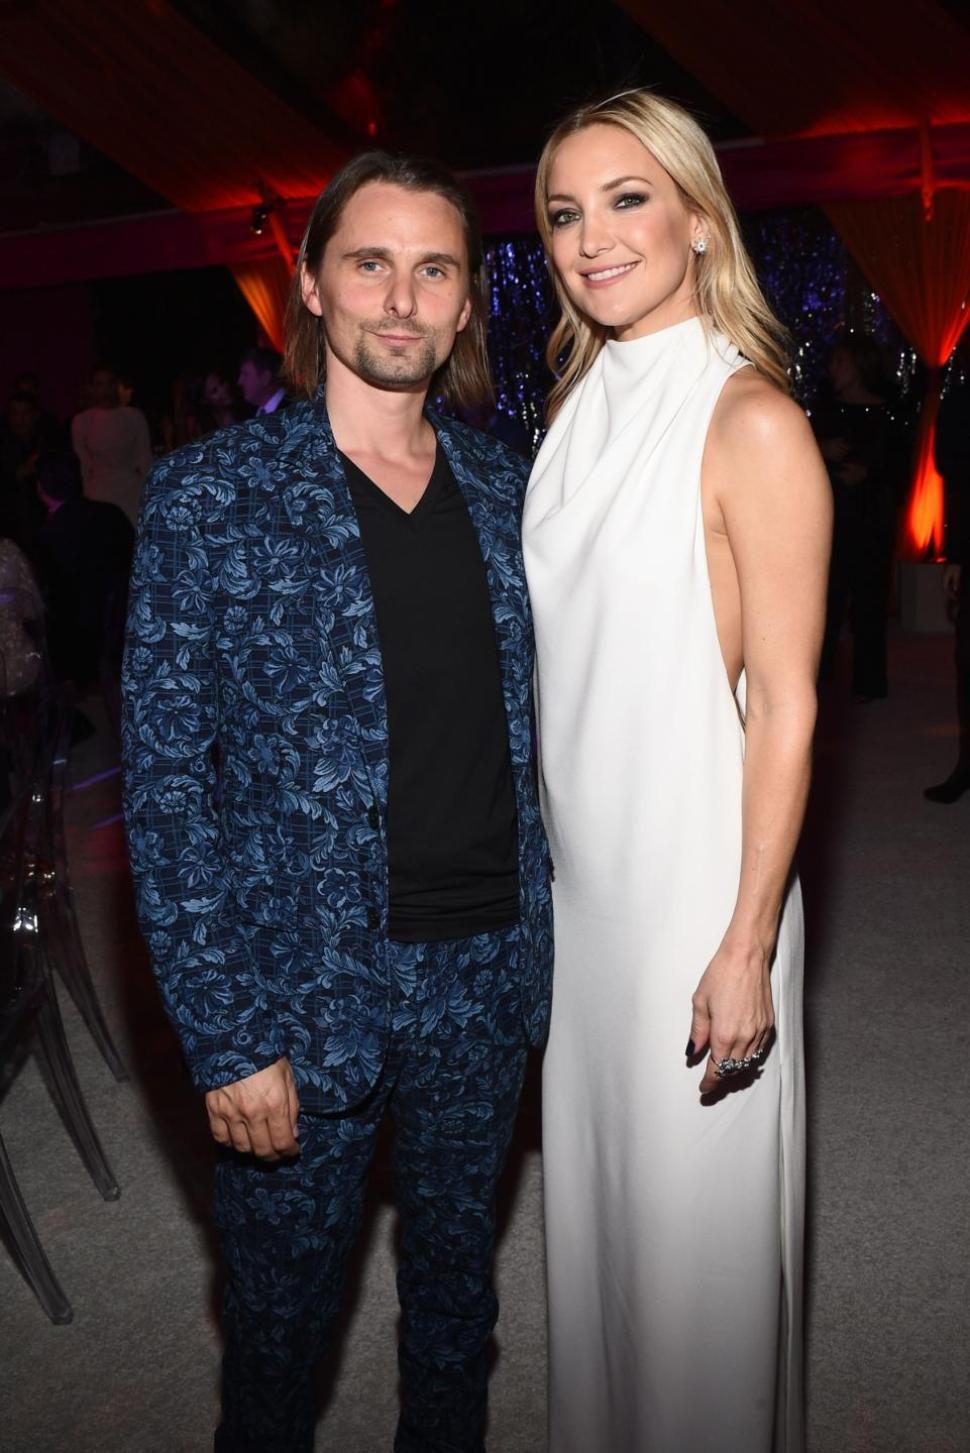 Matthew Bellamy and Kate Hudson have called it quits after four years together.